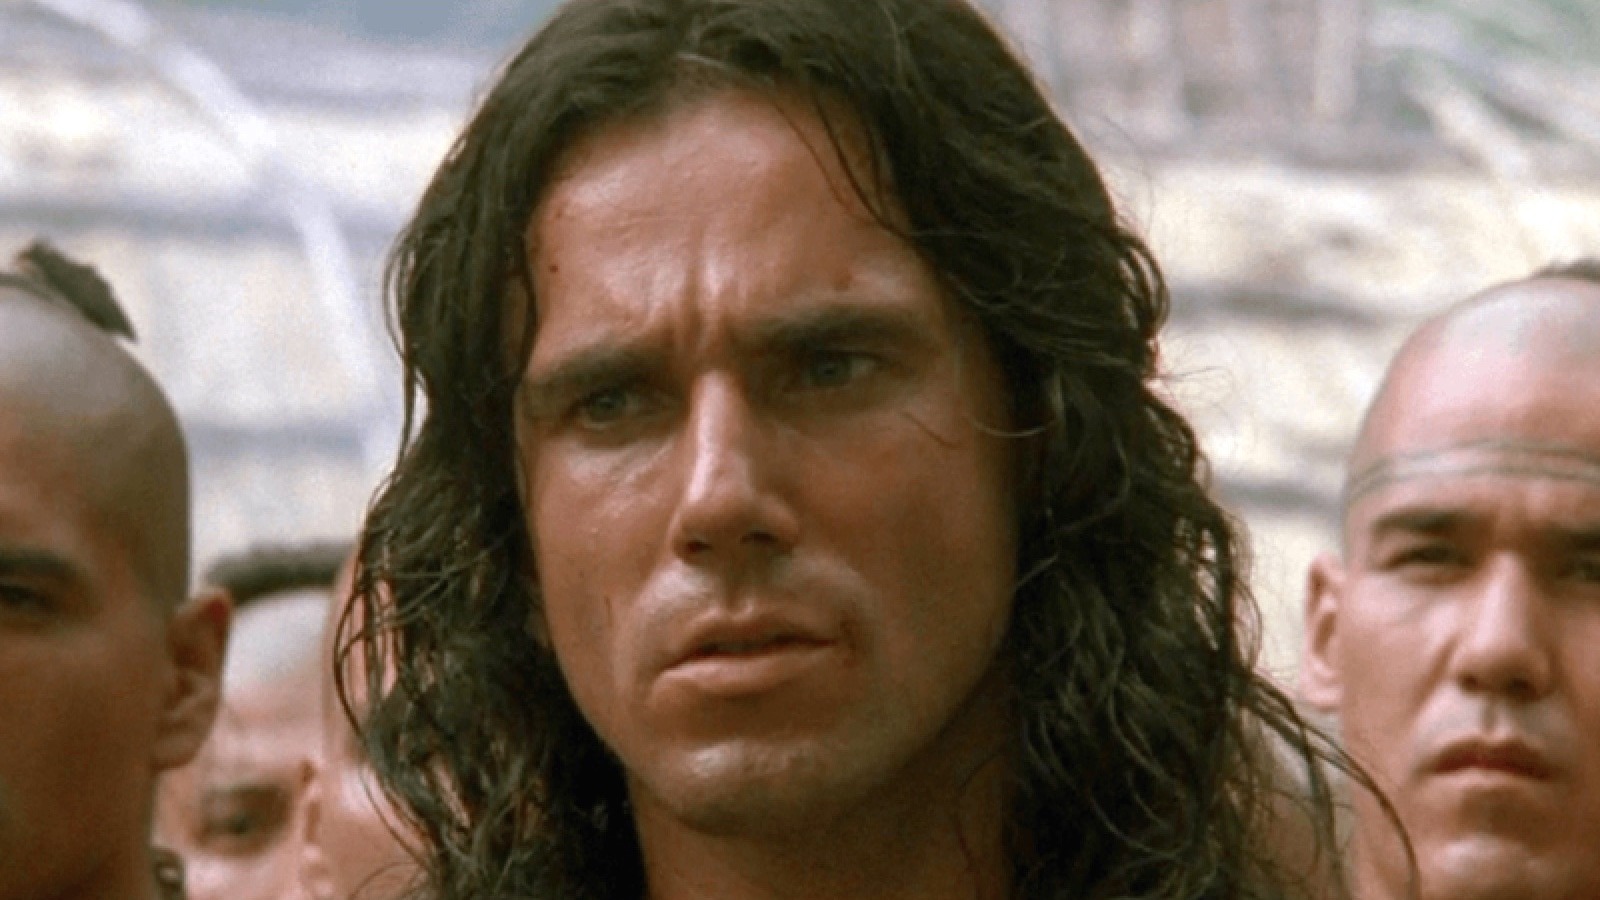 Where Was The Last Of The Mohicans Actually Filmed?